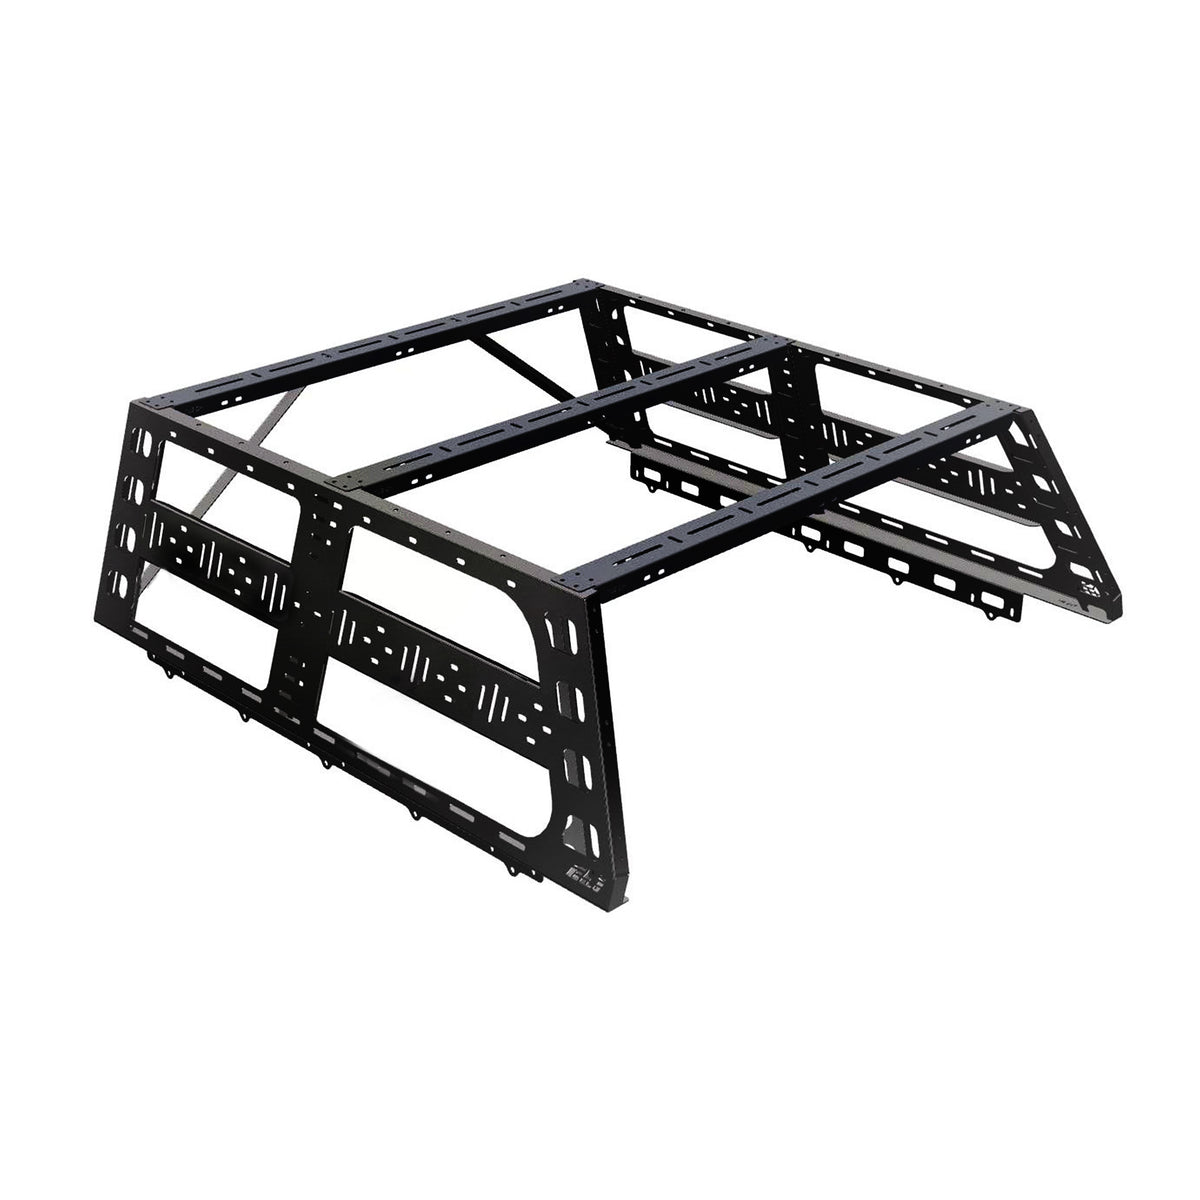 CBI Chevy Colorado Sheet Metal Style Bed Rack | Short Bed Cab Height